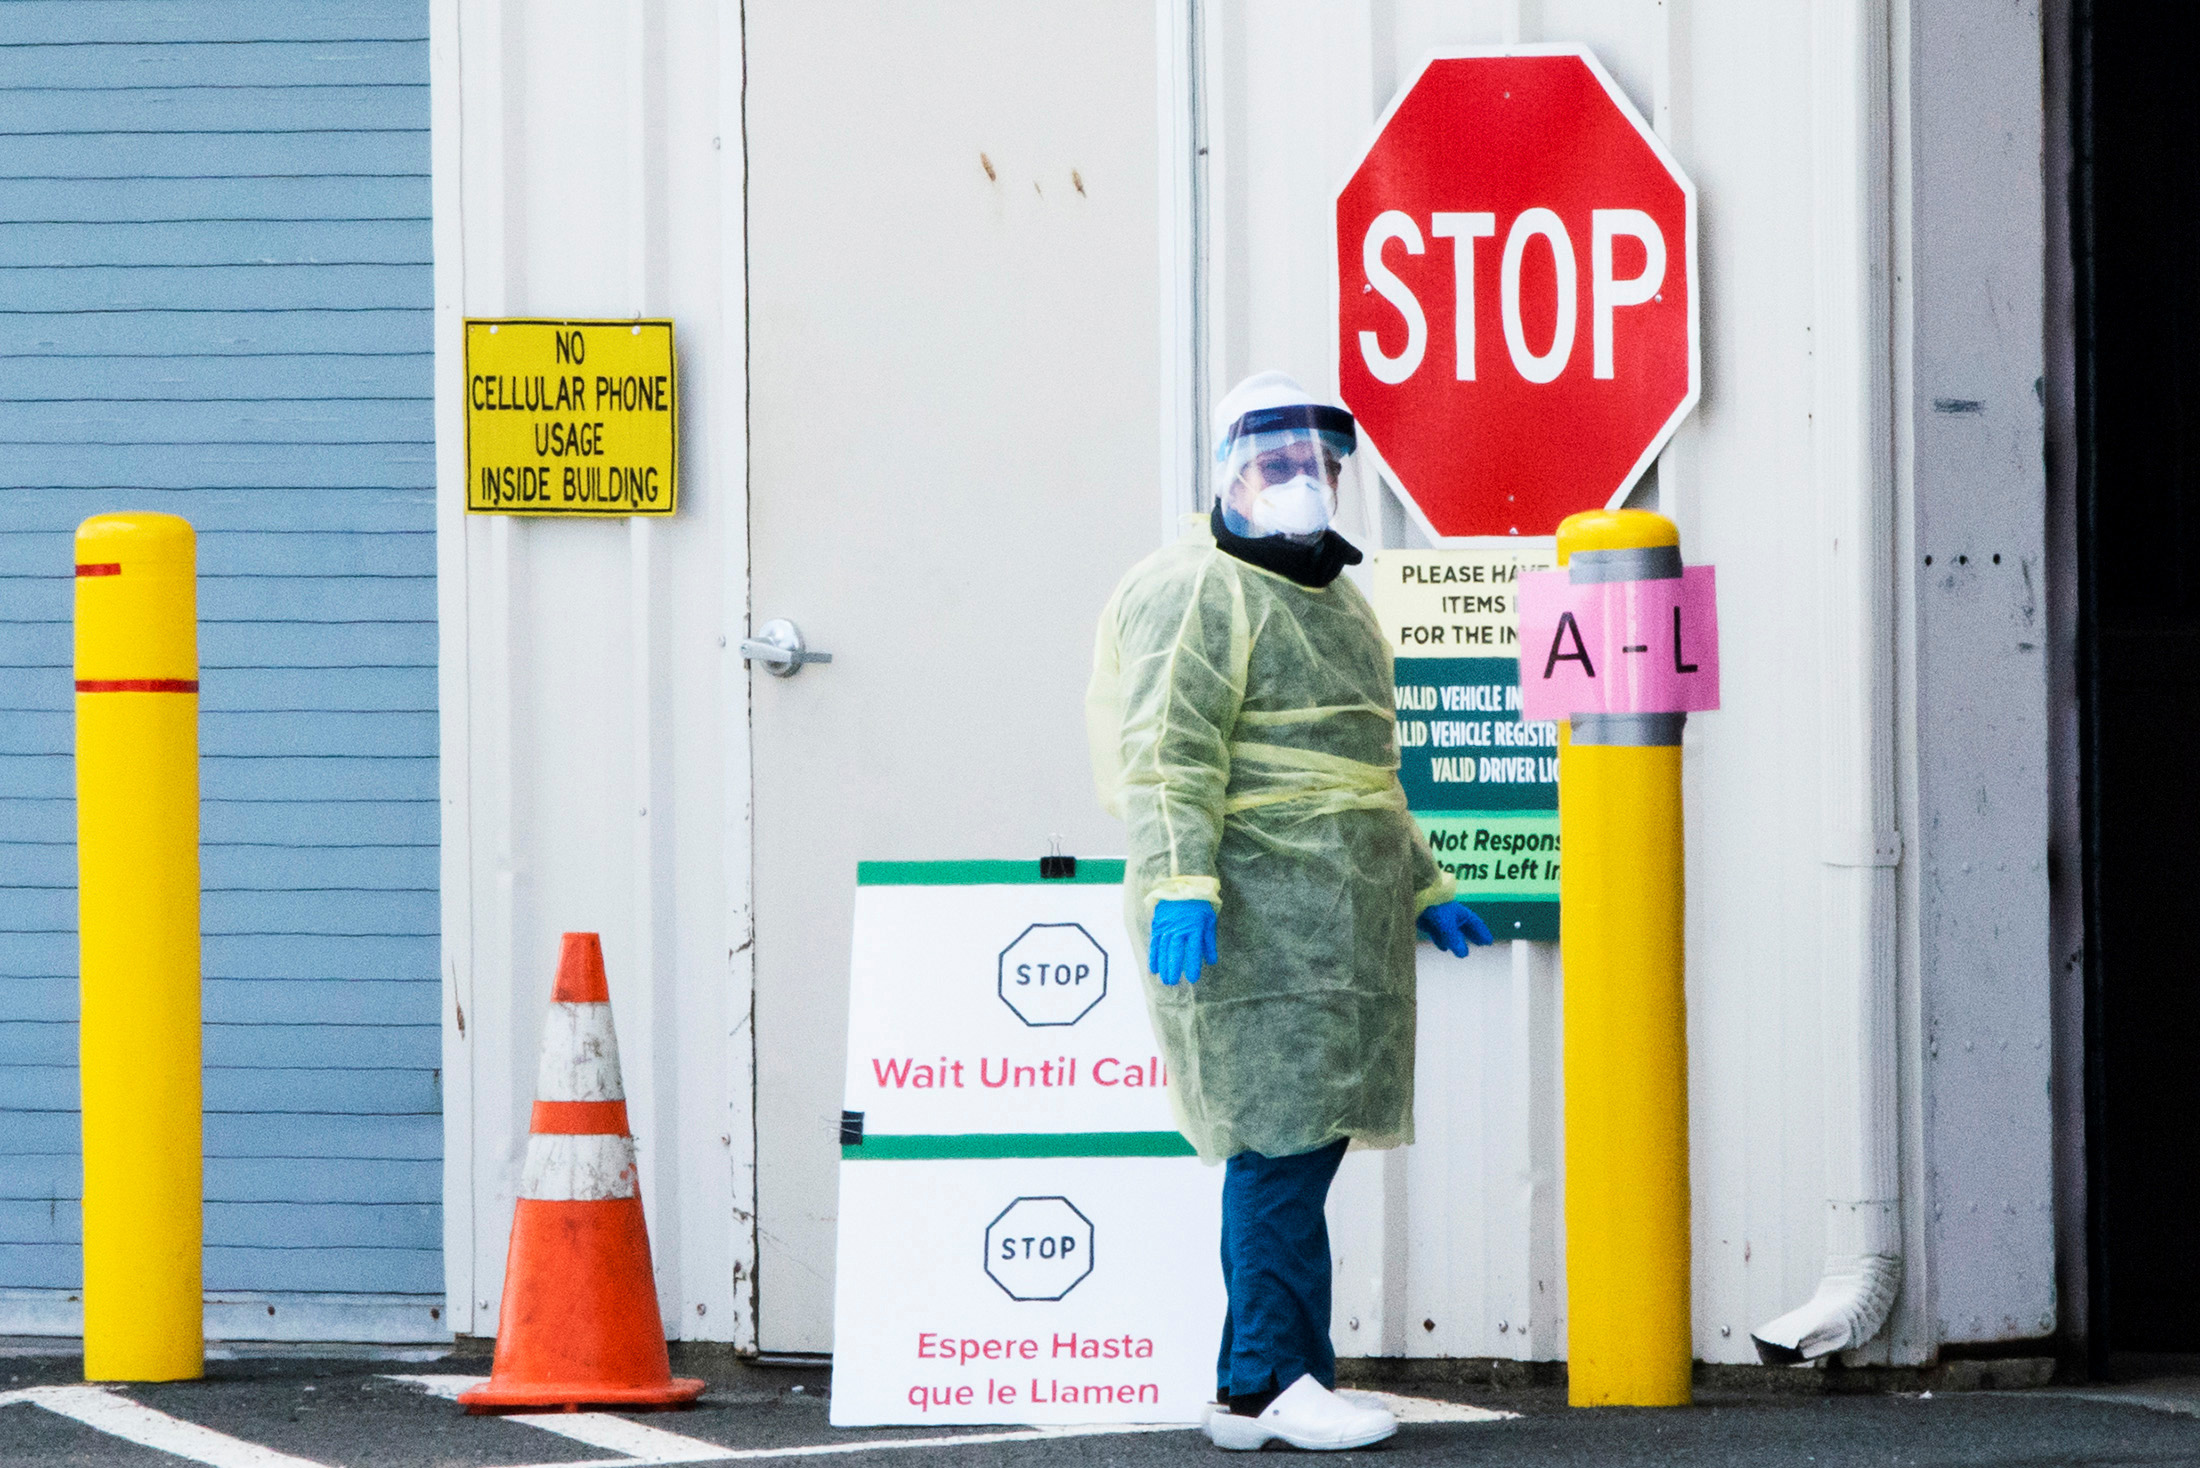 PHOTO: A health worker waits to test people in cars as they use a newly approved saliva-based COVID-19 test at a testing site during the the coronavirus pandemic, in Edison, New Jersey, April 15, 2020.